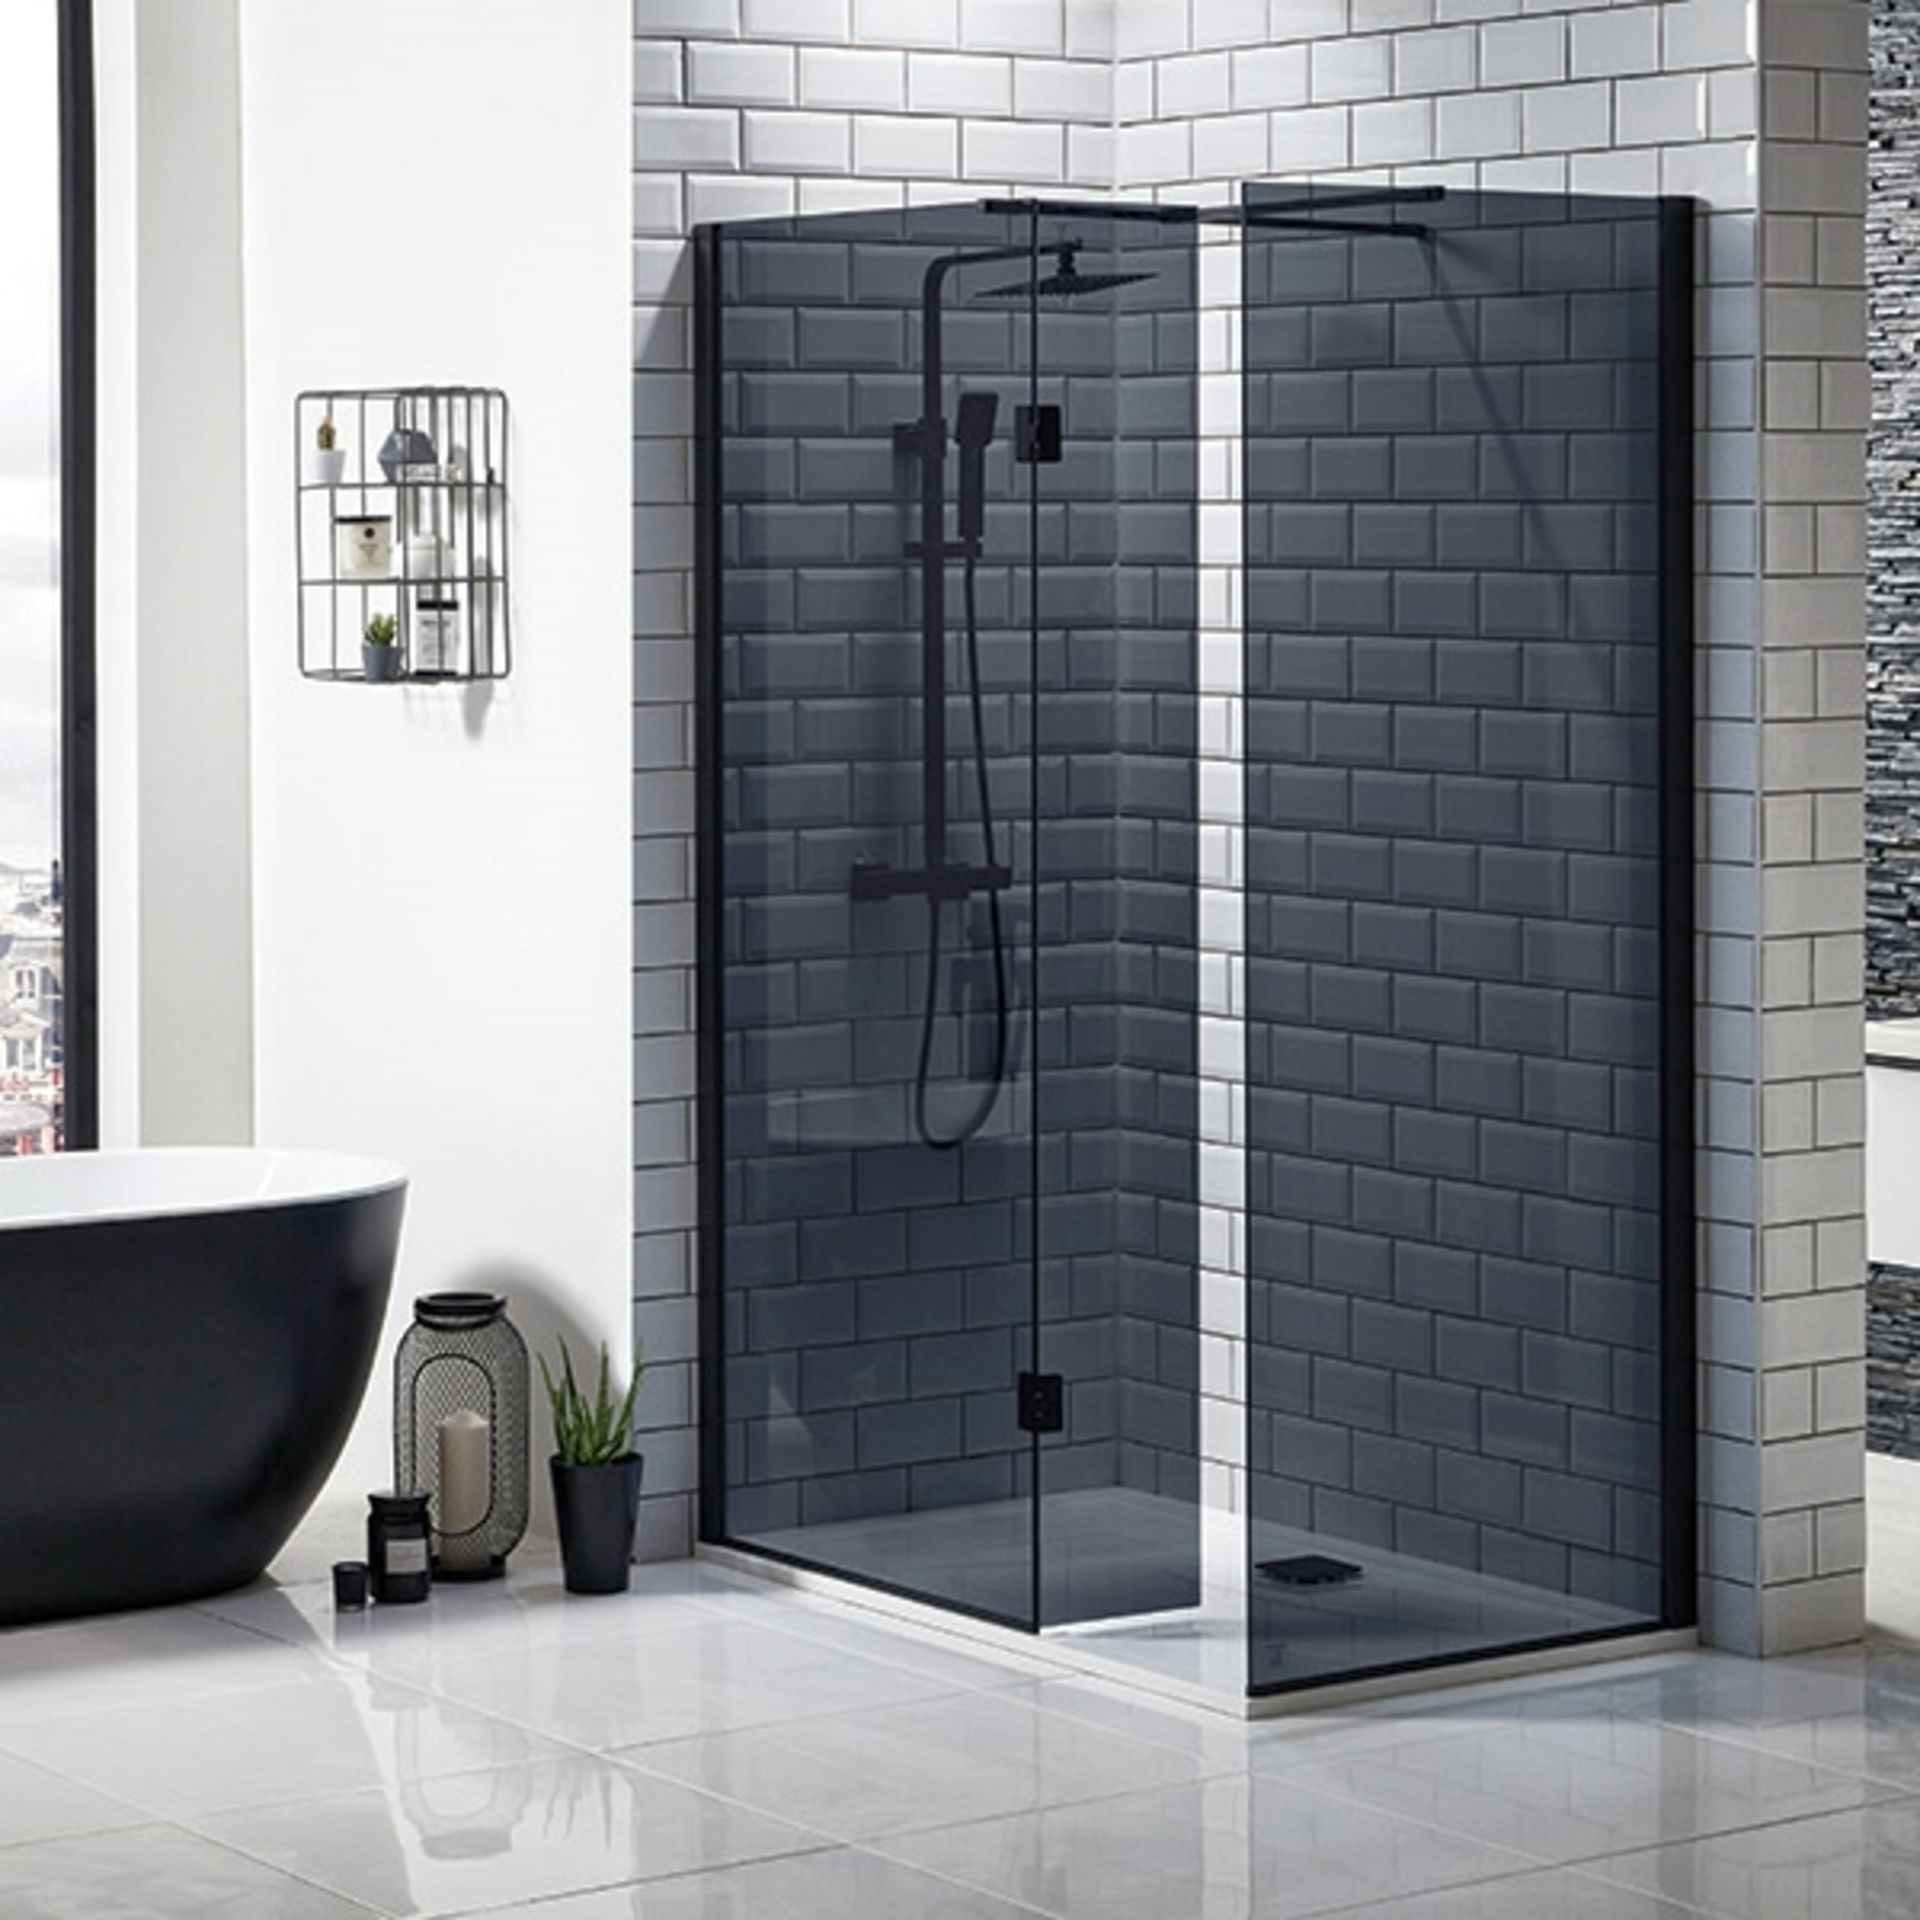 New (O37) S8 Mono Wetroom Panel 700mm With 275 Return. Rrp £380. 2000mm In Height 8mm Toughen...